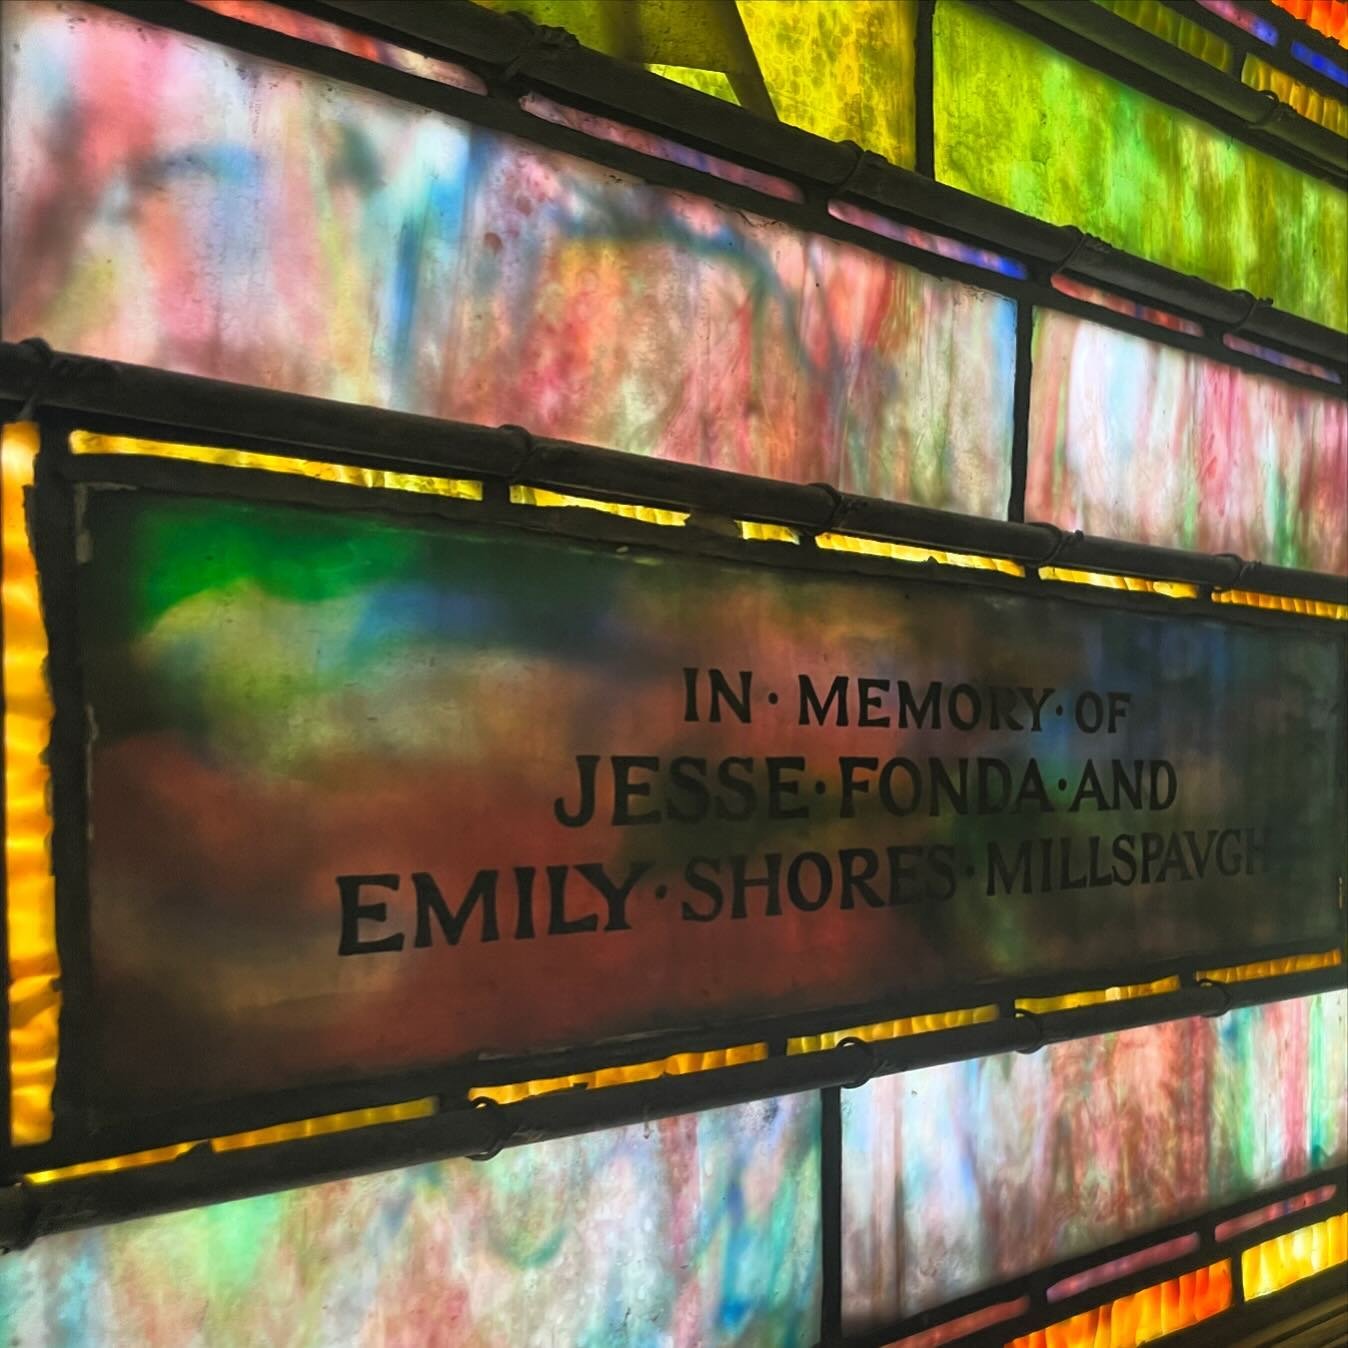 We&rsquo;re doing a little research into the Center on Main&rsquo;s past, and are looking into little gems like the names in the historic stained glass windows- this is just one example. 

A quick search tells us that &ldquo;Emily Shores was born on 